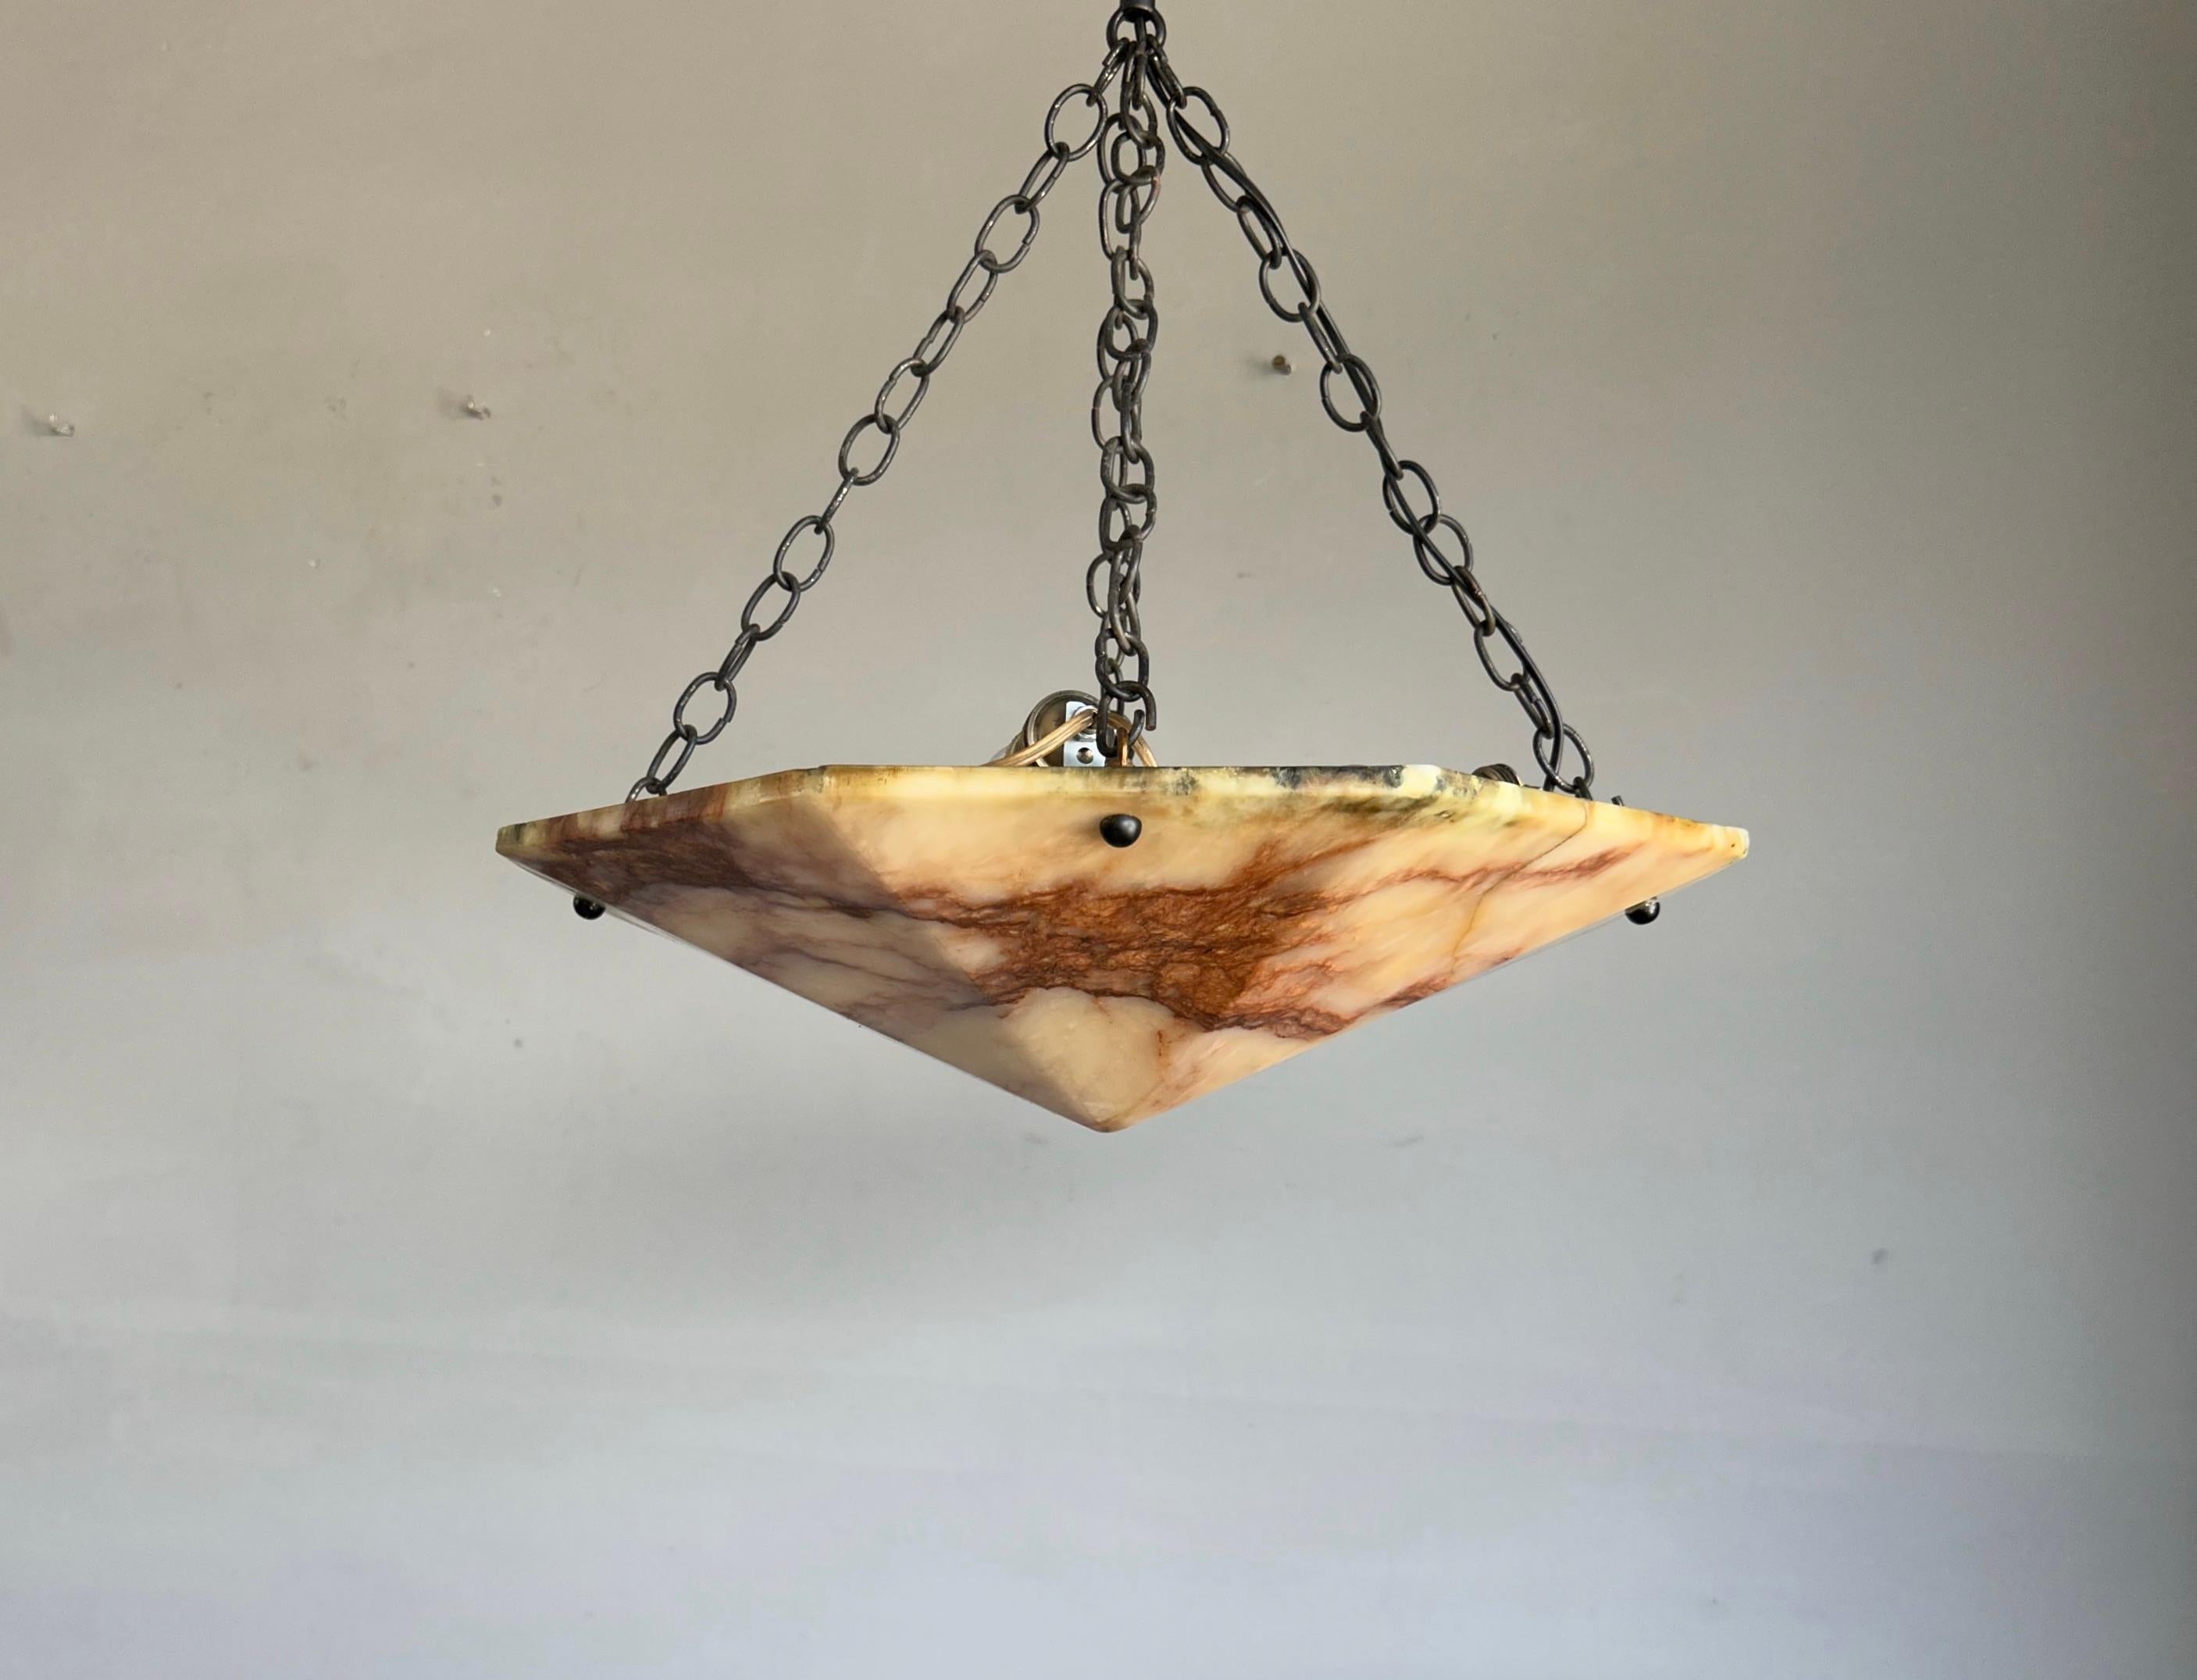 Stunning geometrical Art Deco design alabaster light fixture.

This pure and large size Art Deco pendant from the early 1900s is an absolute joy to come home to. The rare and beautiful, diamond shape alabaster shade is perfectly complemented by the